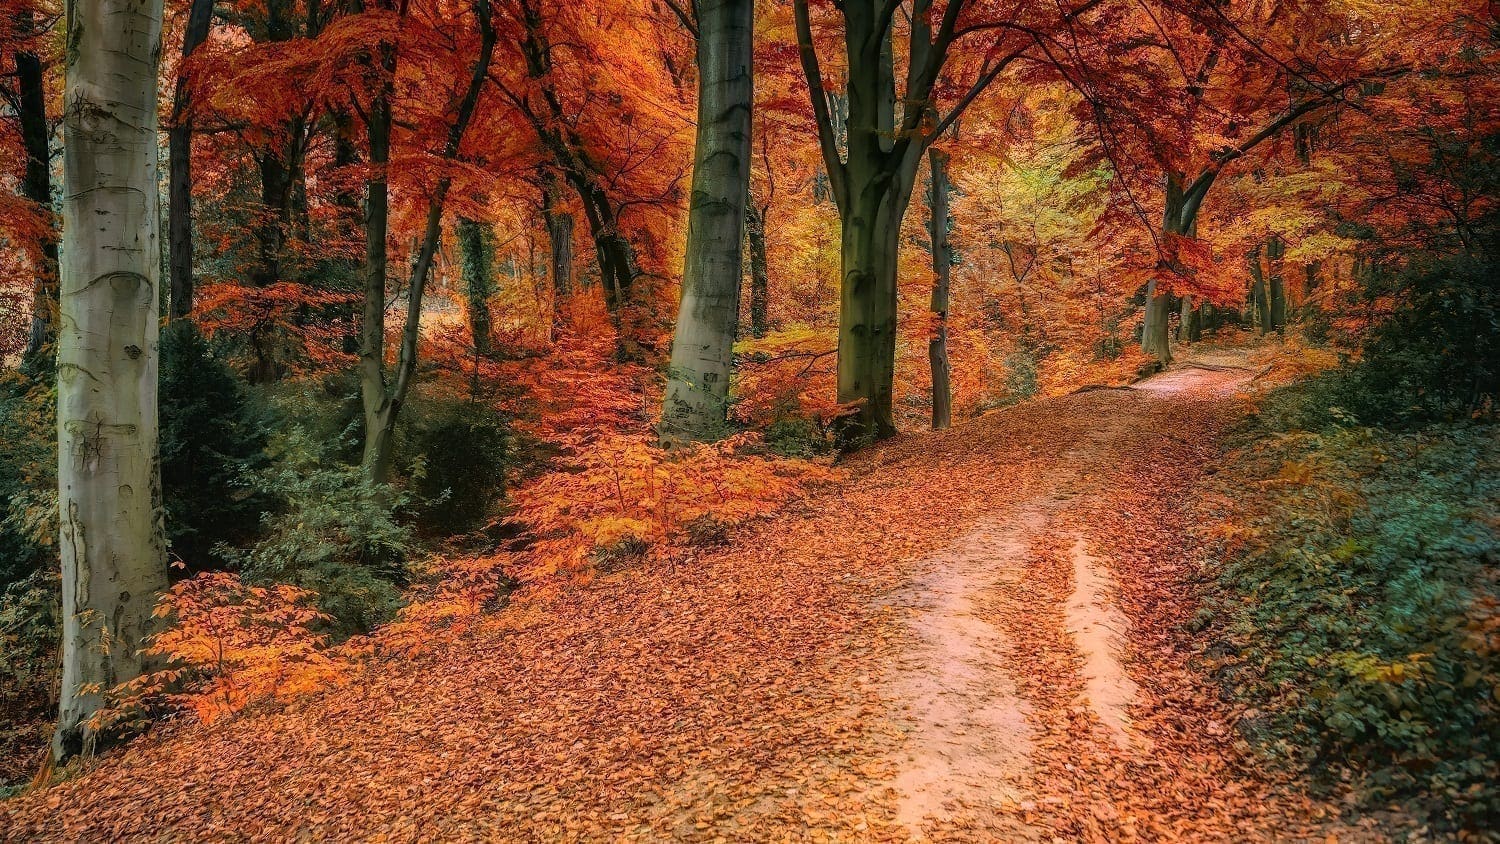 Autumn forest with leave covered path, photo credit: Johannes Plenio at Pexels